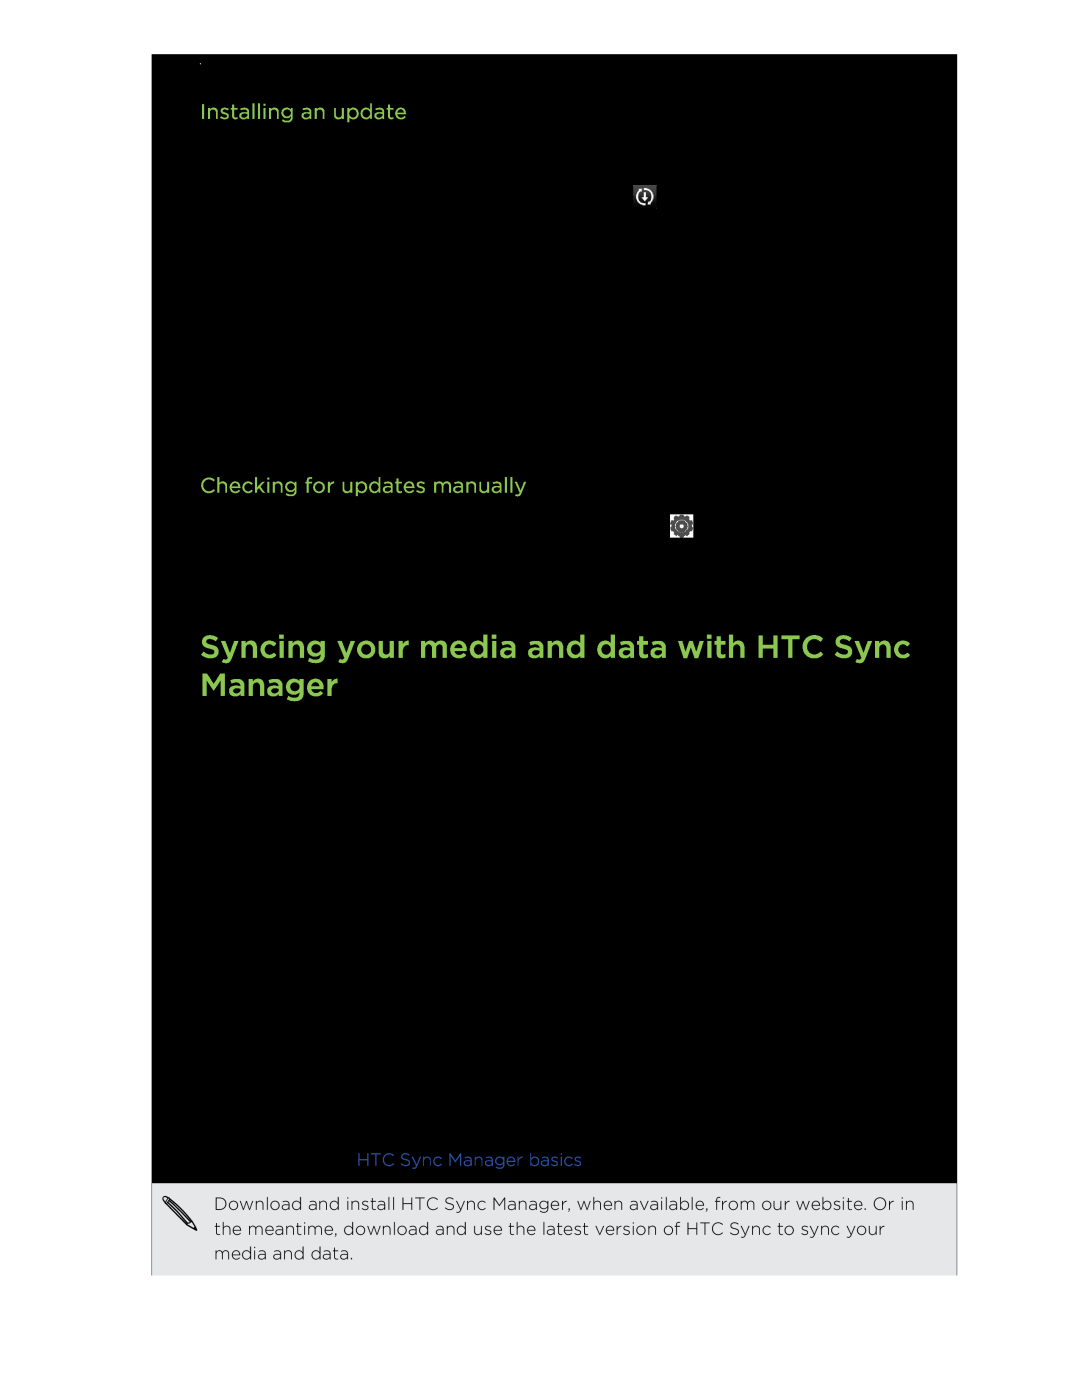 HTC C3HTCONEV4GBUNLOCKEDBLACK manual Syncing your media and data with HTC Sync Manager, Installing an update 